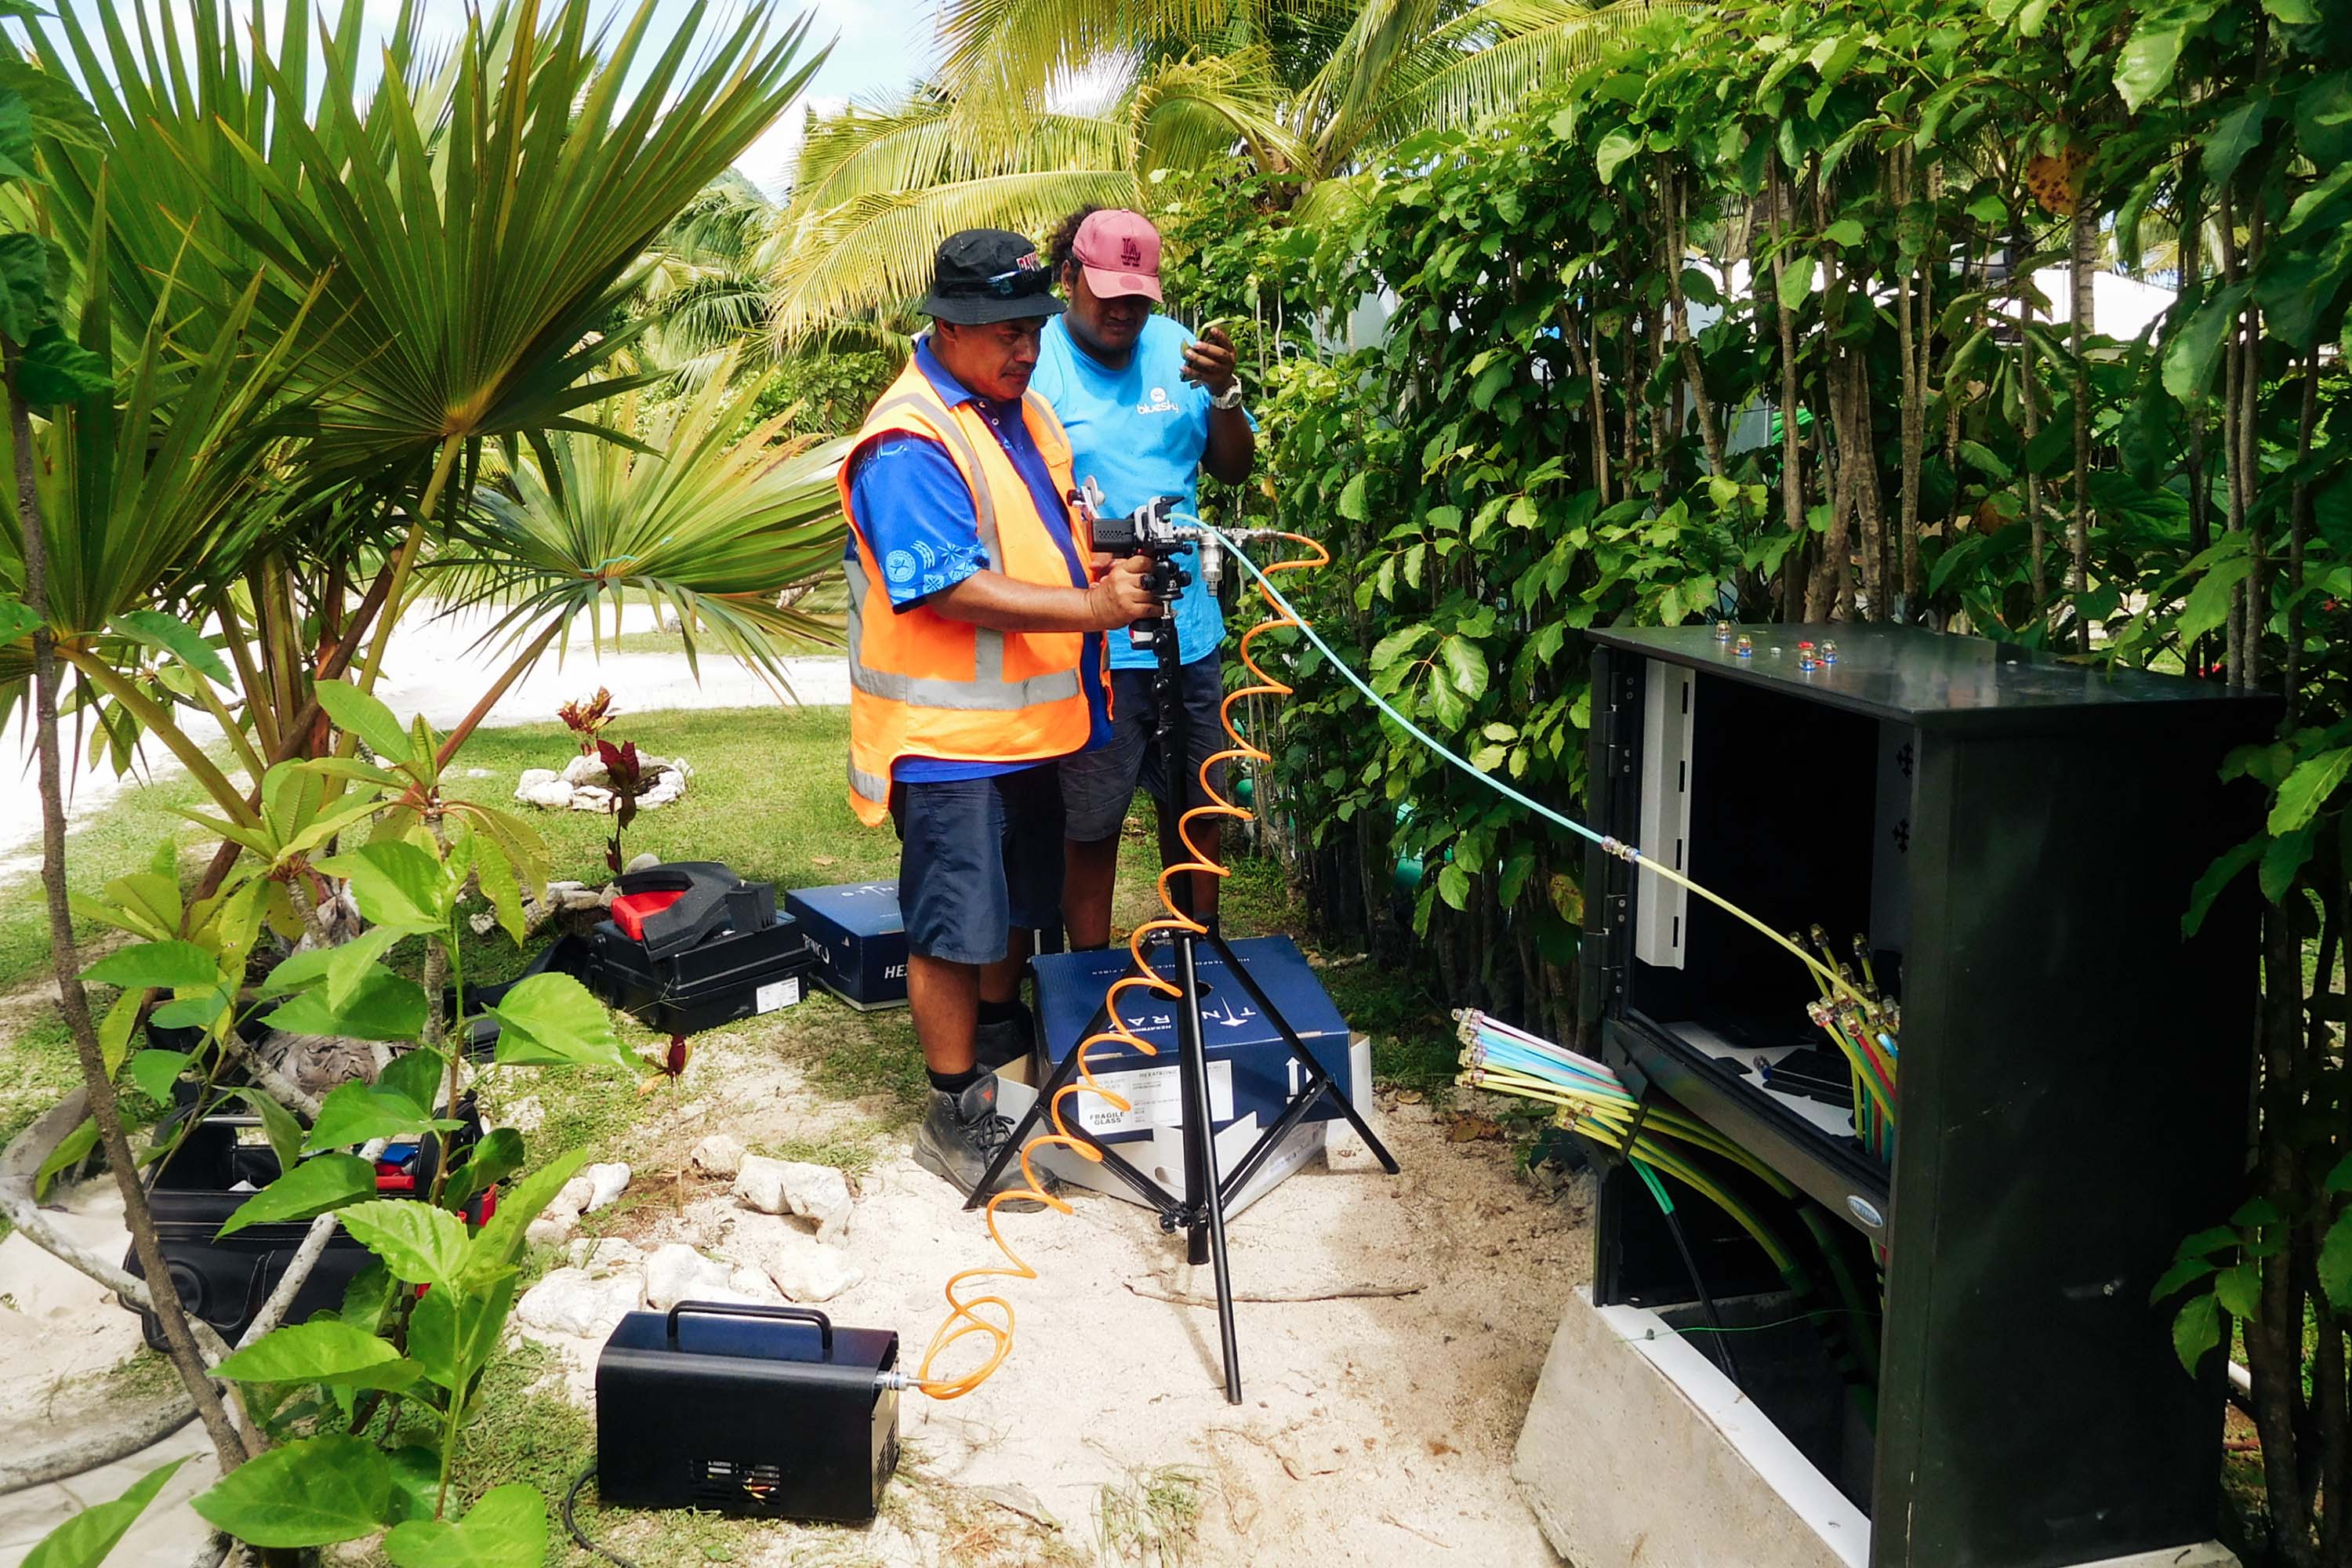 Two people install Stingray Air Blown Fiber into a cabinet. The surroundings are green, with palm trees and sand.